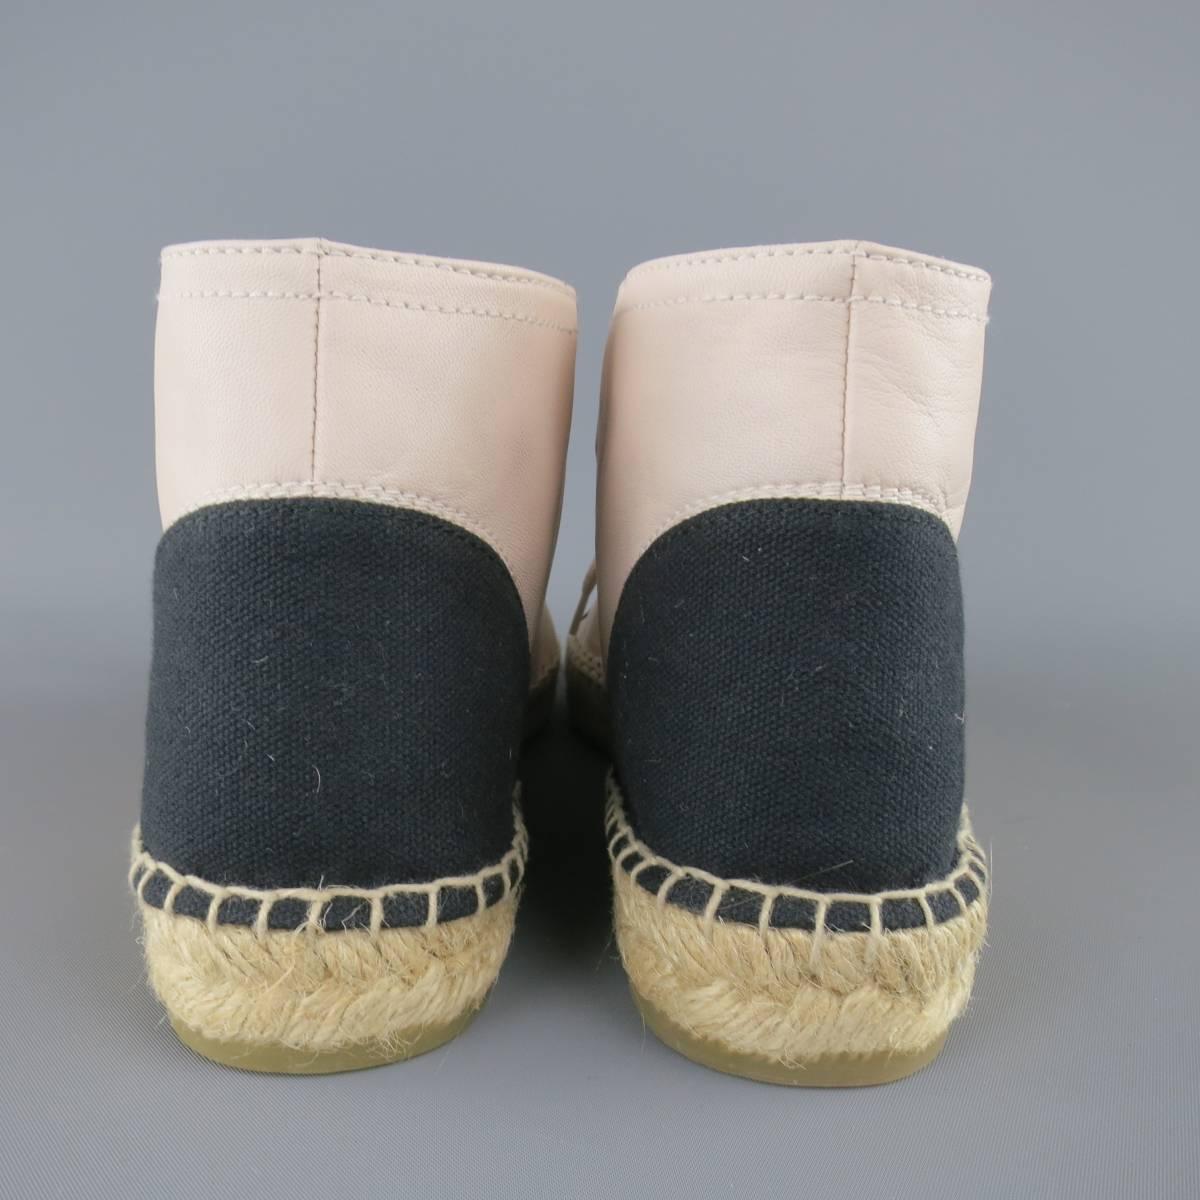 CHANEL Size 12 Light Pink & Black Leather & Canvas Espadrille Chukka Boots 2